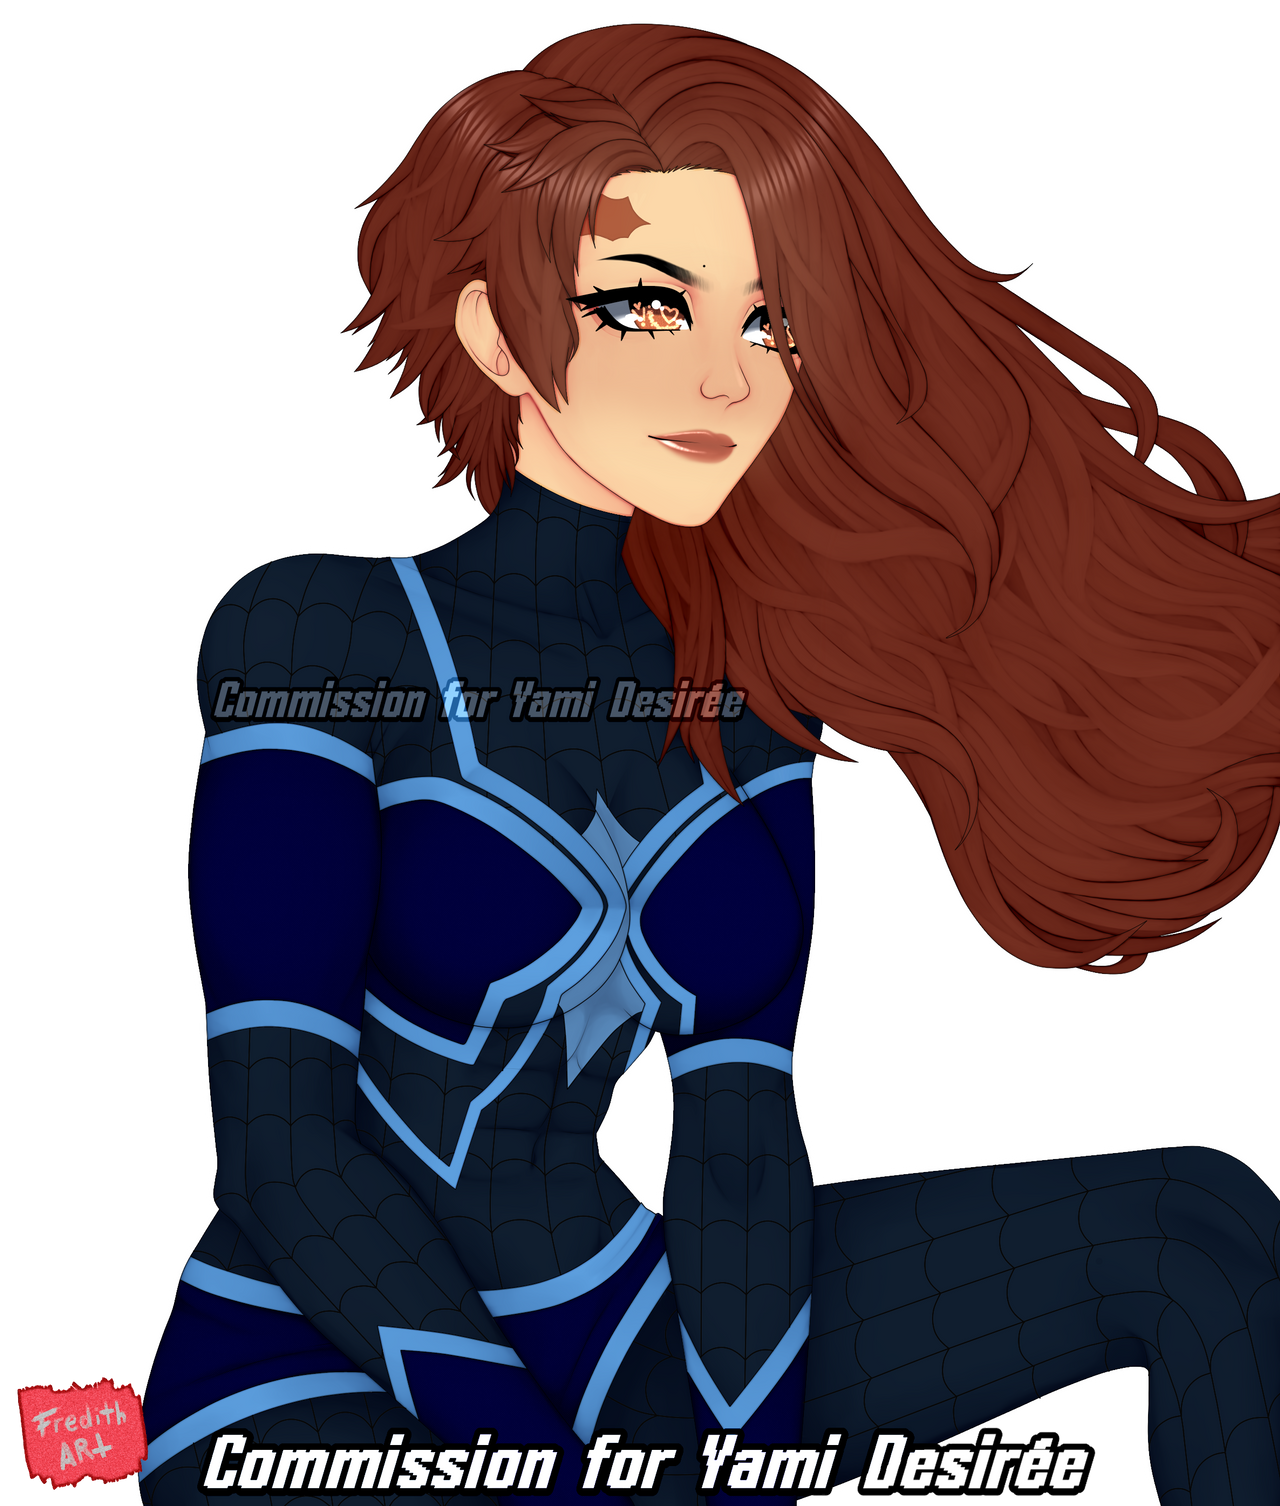 Commission: Spidersona by cosmicallycapricious on DeviantArt